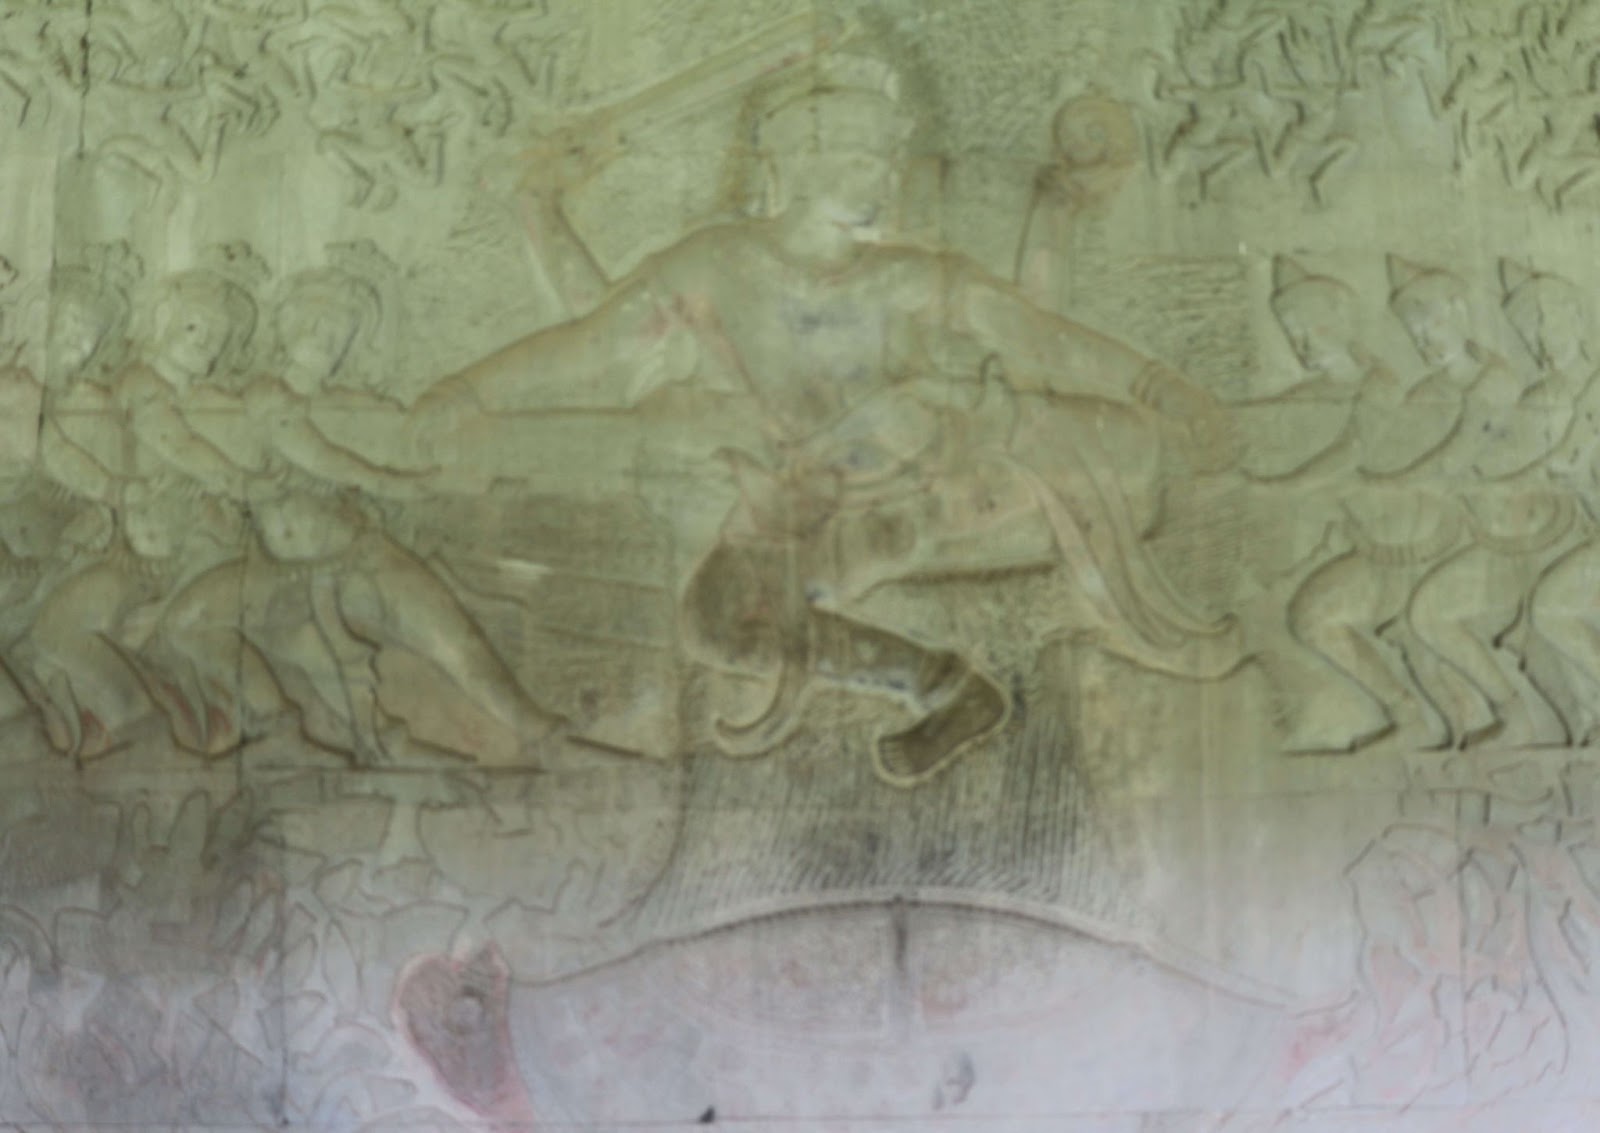 reasons to visit Angkor Wat. This is one of the many intricate bas reliefs at Angkor Wat.